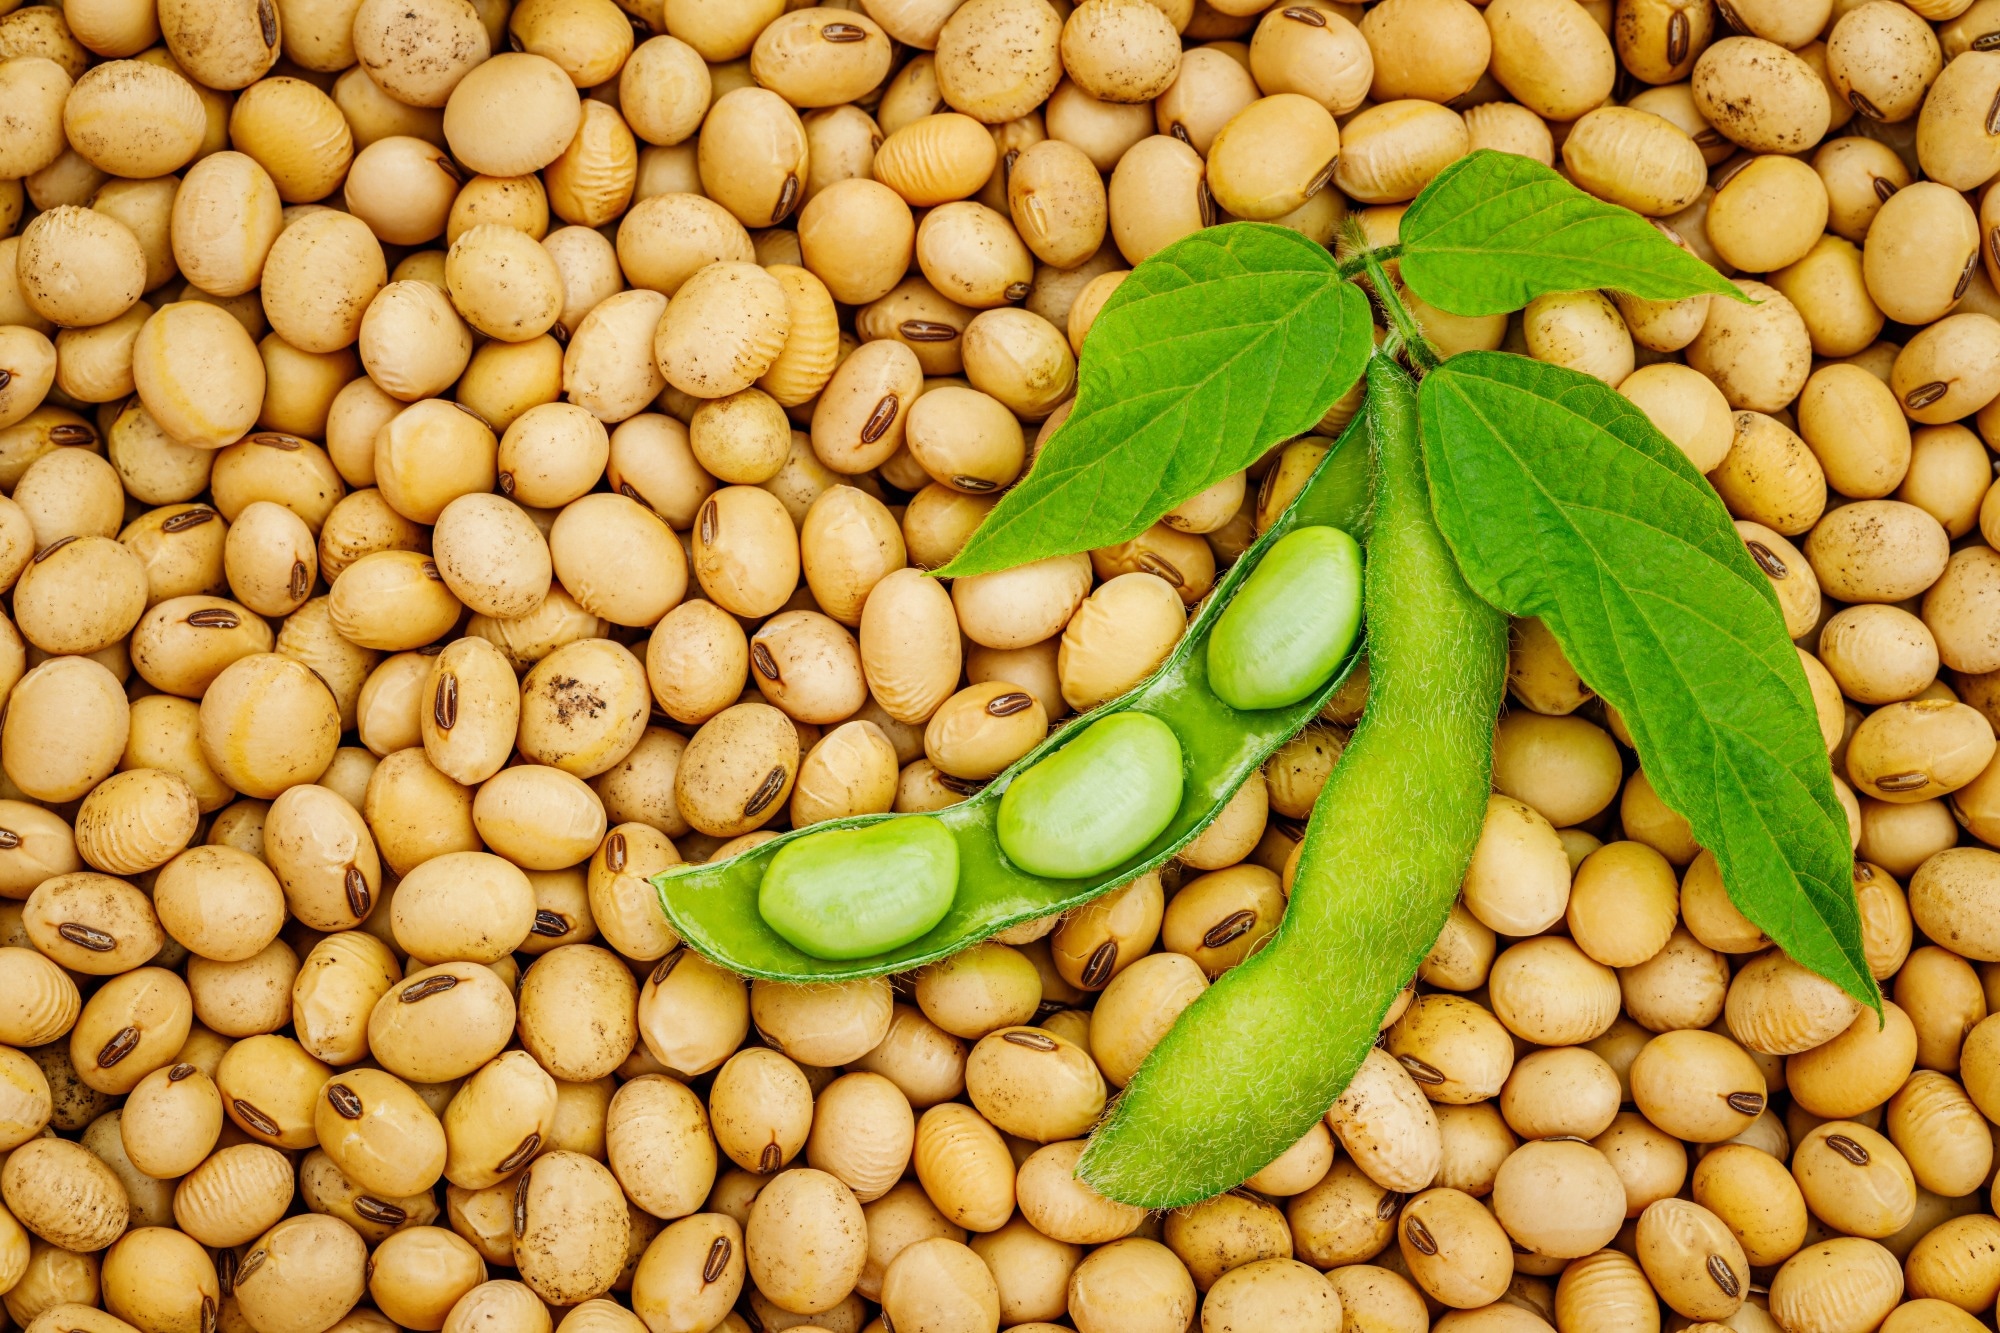 Study: Impact of Plant Protein Intakes on Nutrient Adequacy in the US. Image Credit: nnattalli / Shutterstock